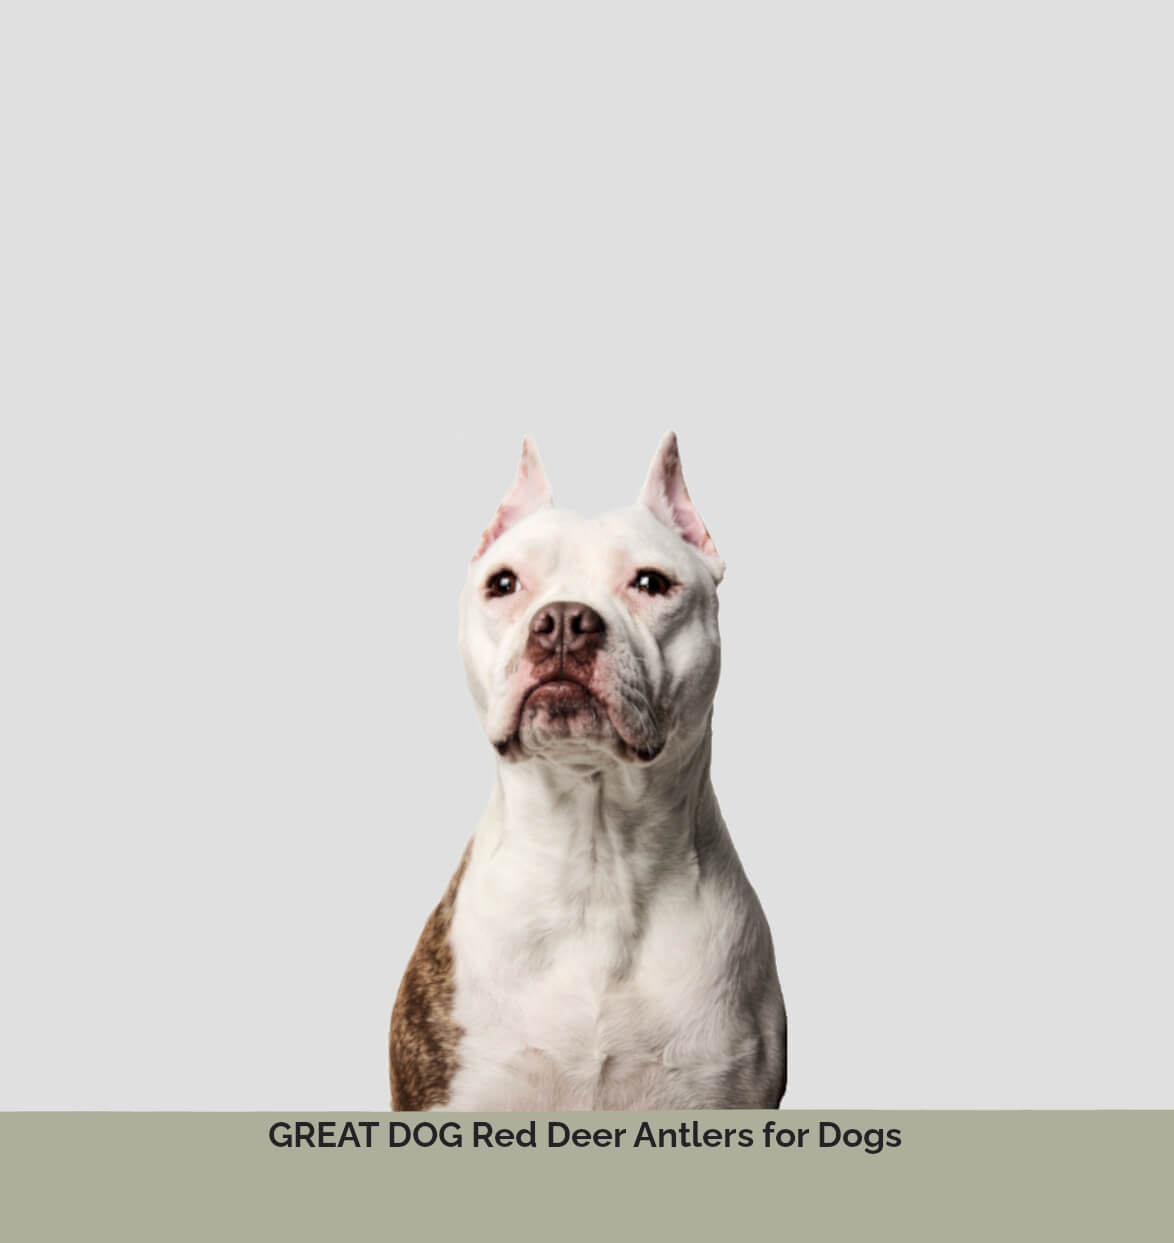 pitbull-dog-image-with-text-red-deer-antler-chews-for-dogs